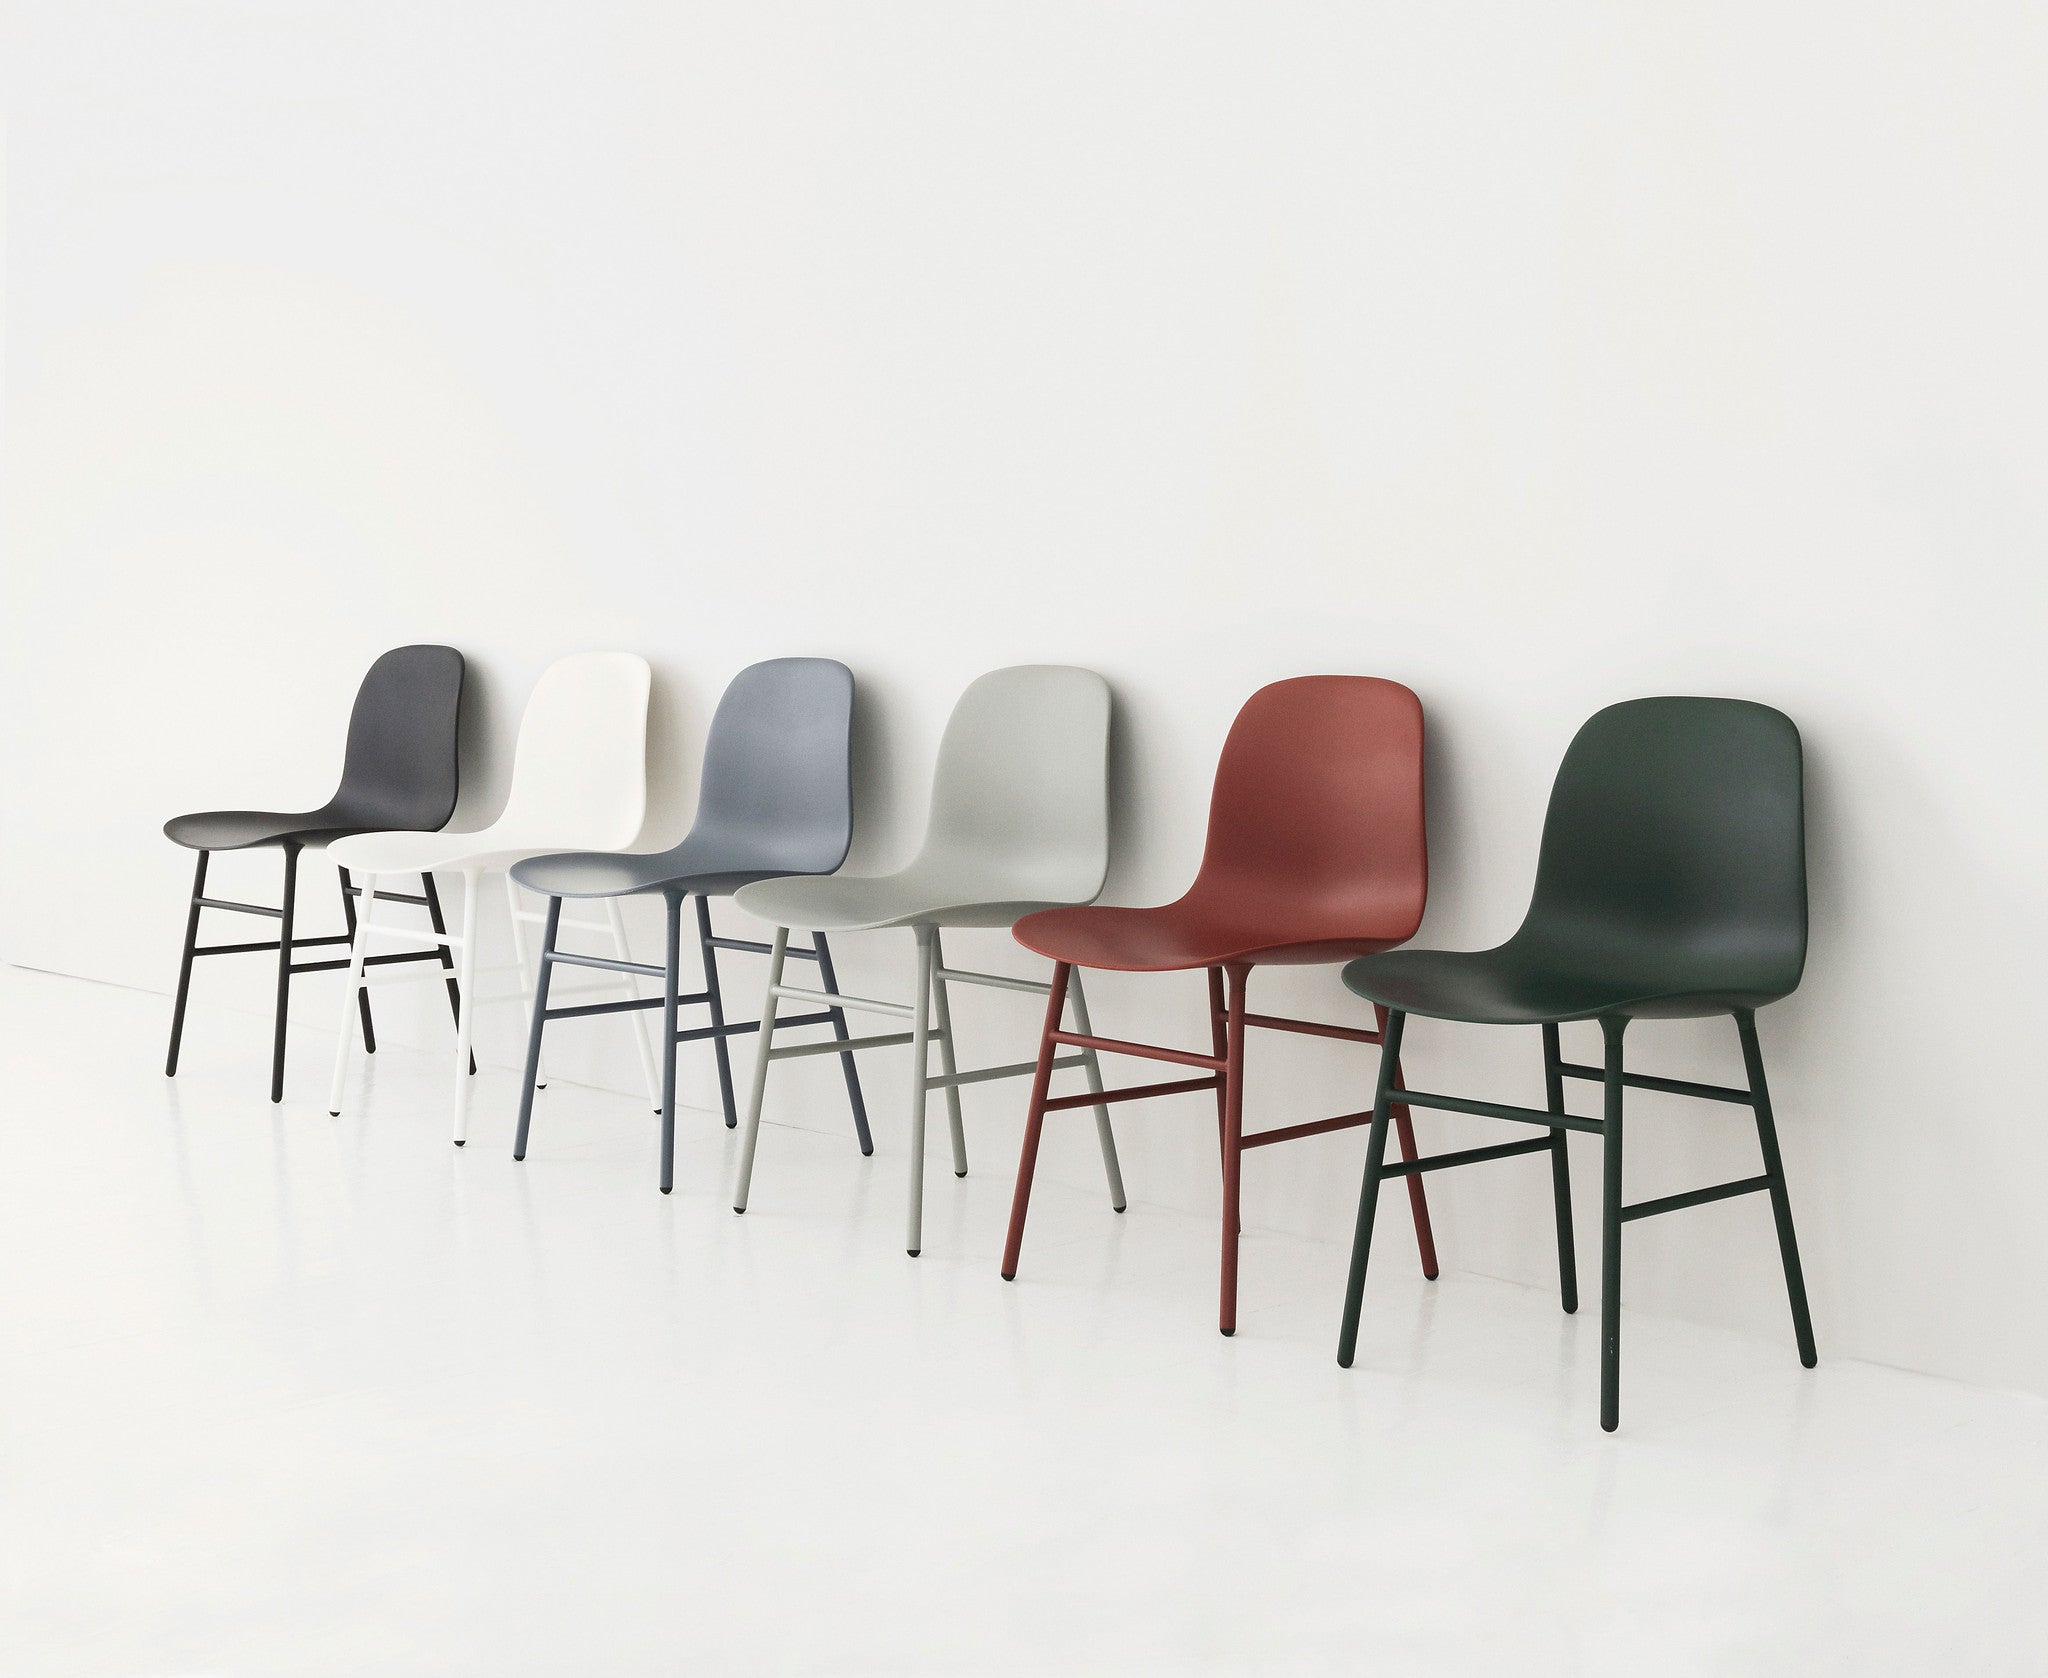 Form Chair - Stahl